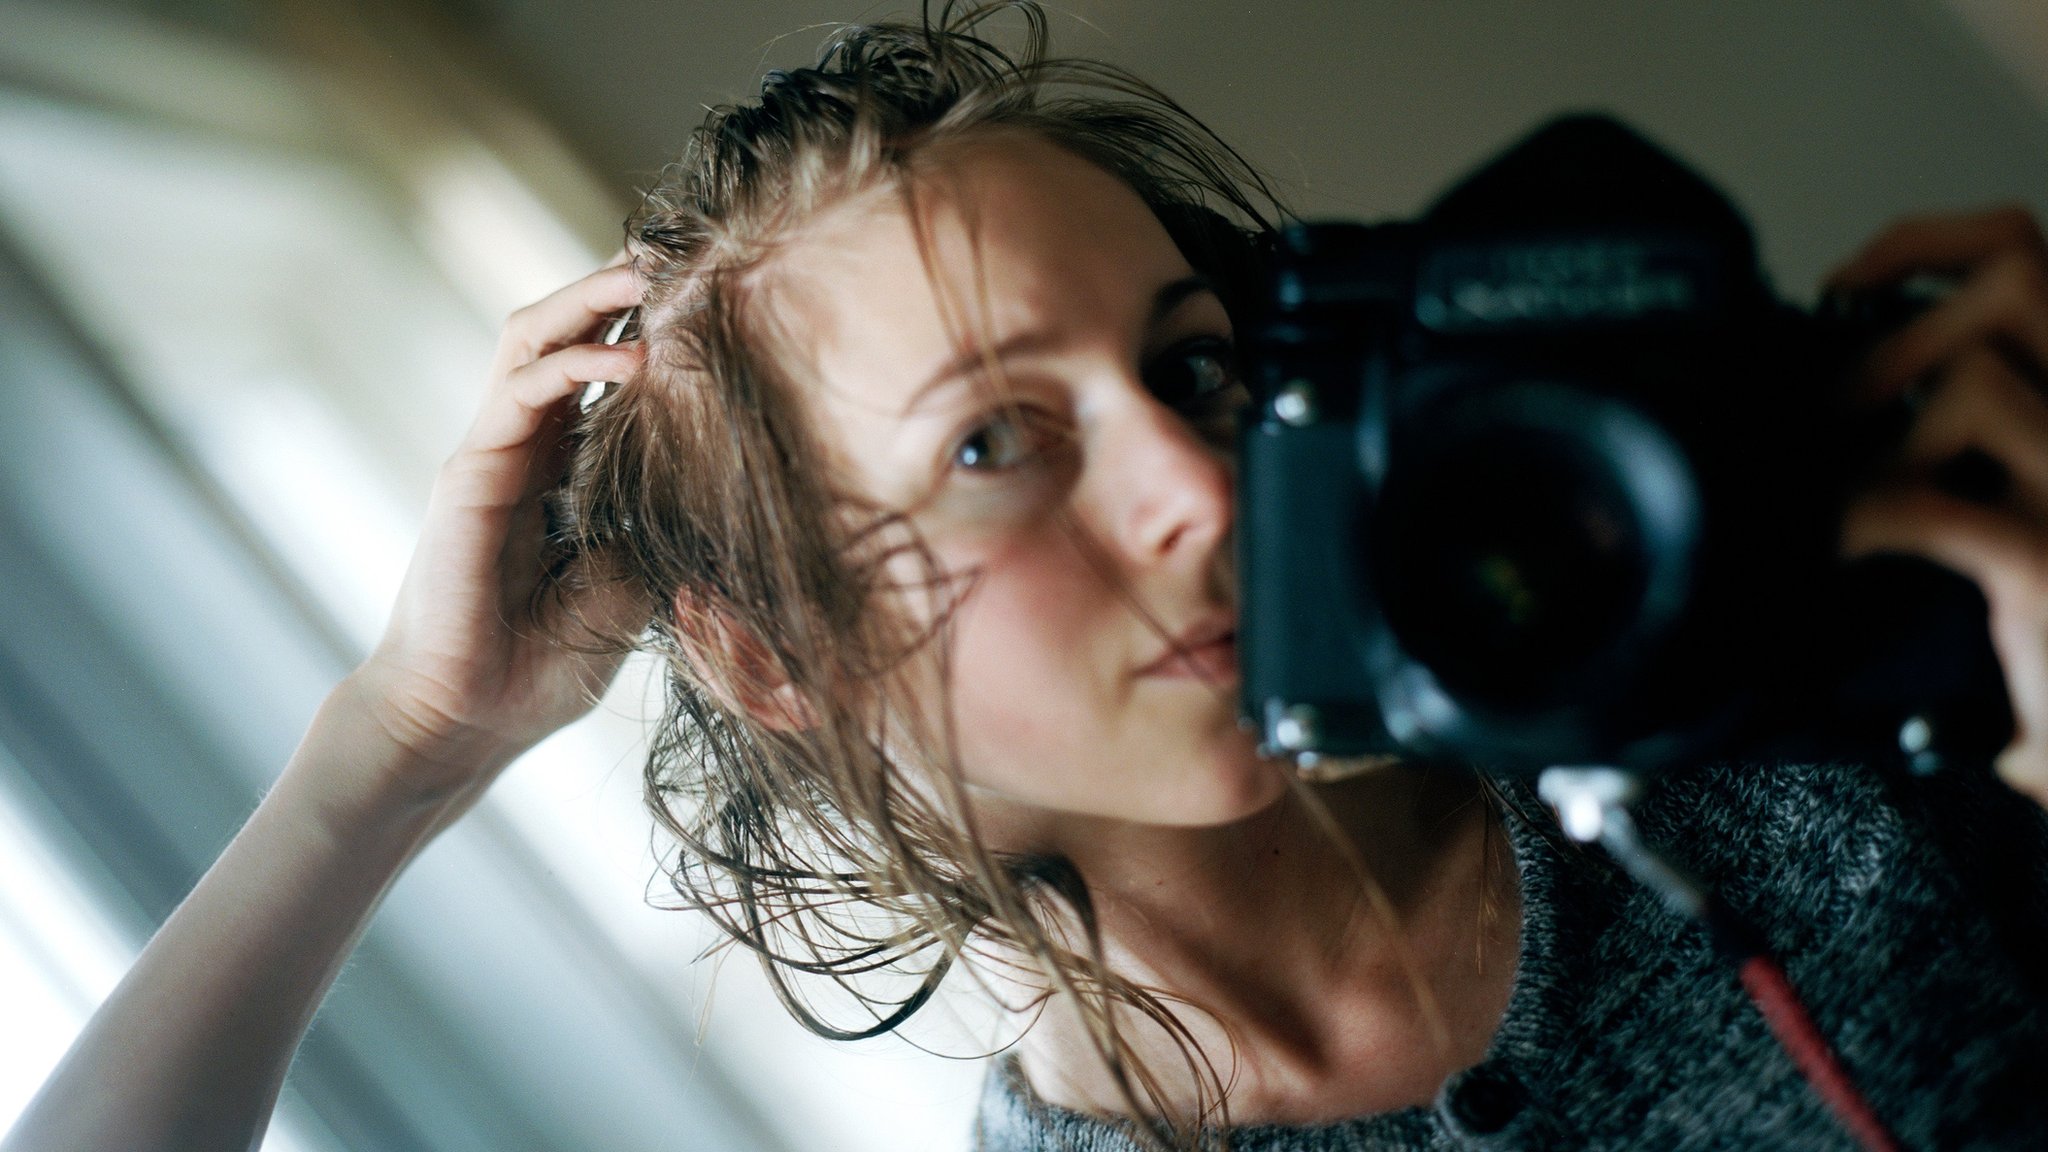 Carly Clarke photographs herself in the mirror at a time when her hair was falling out